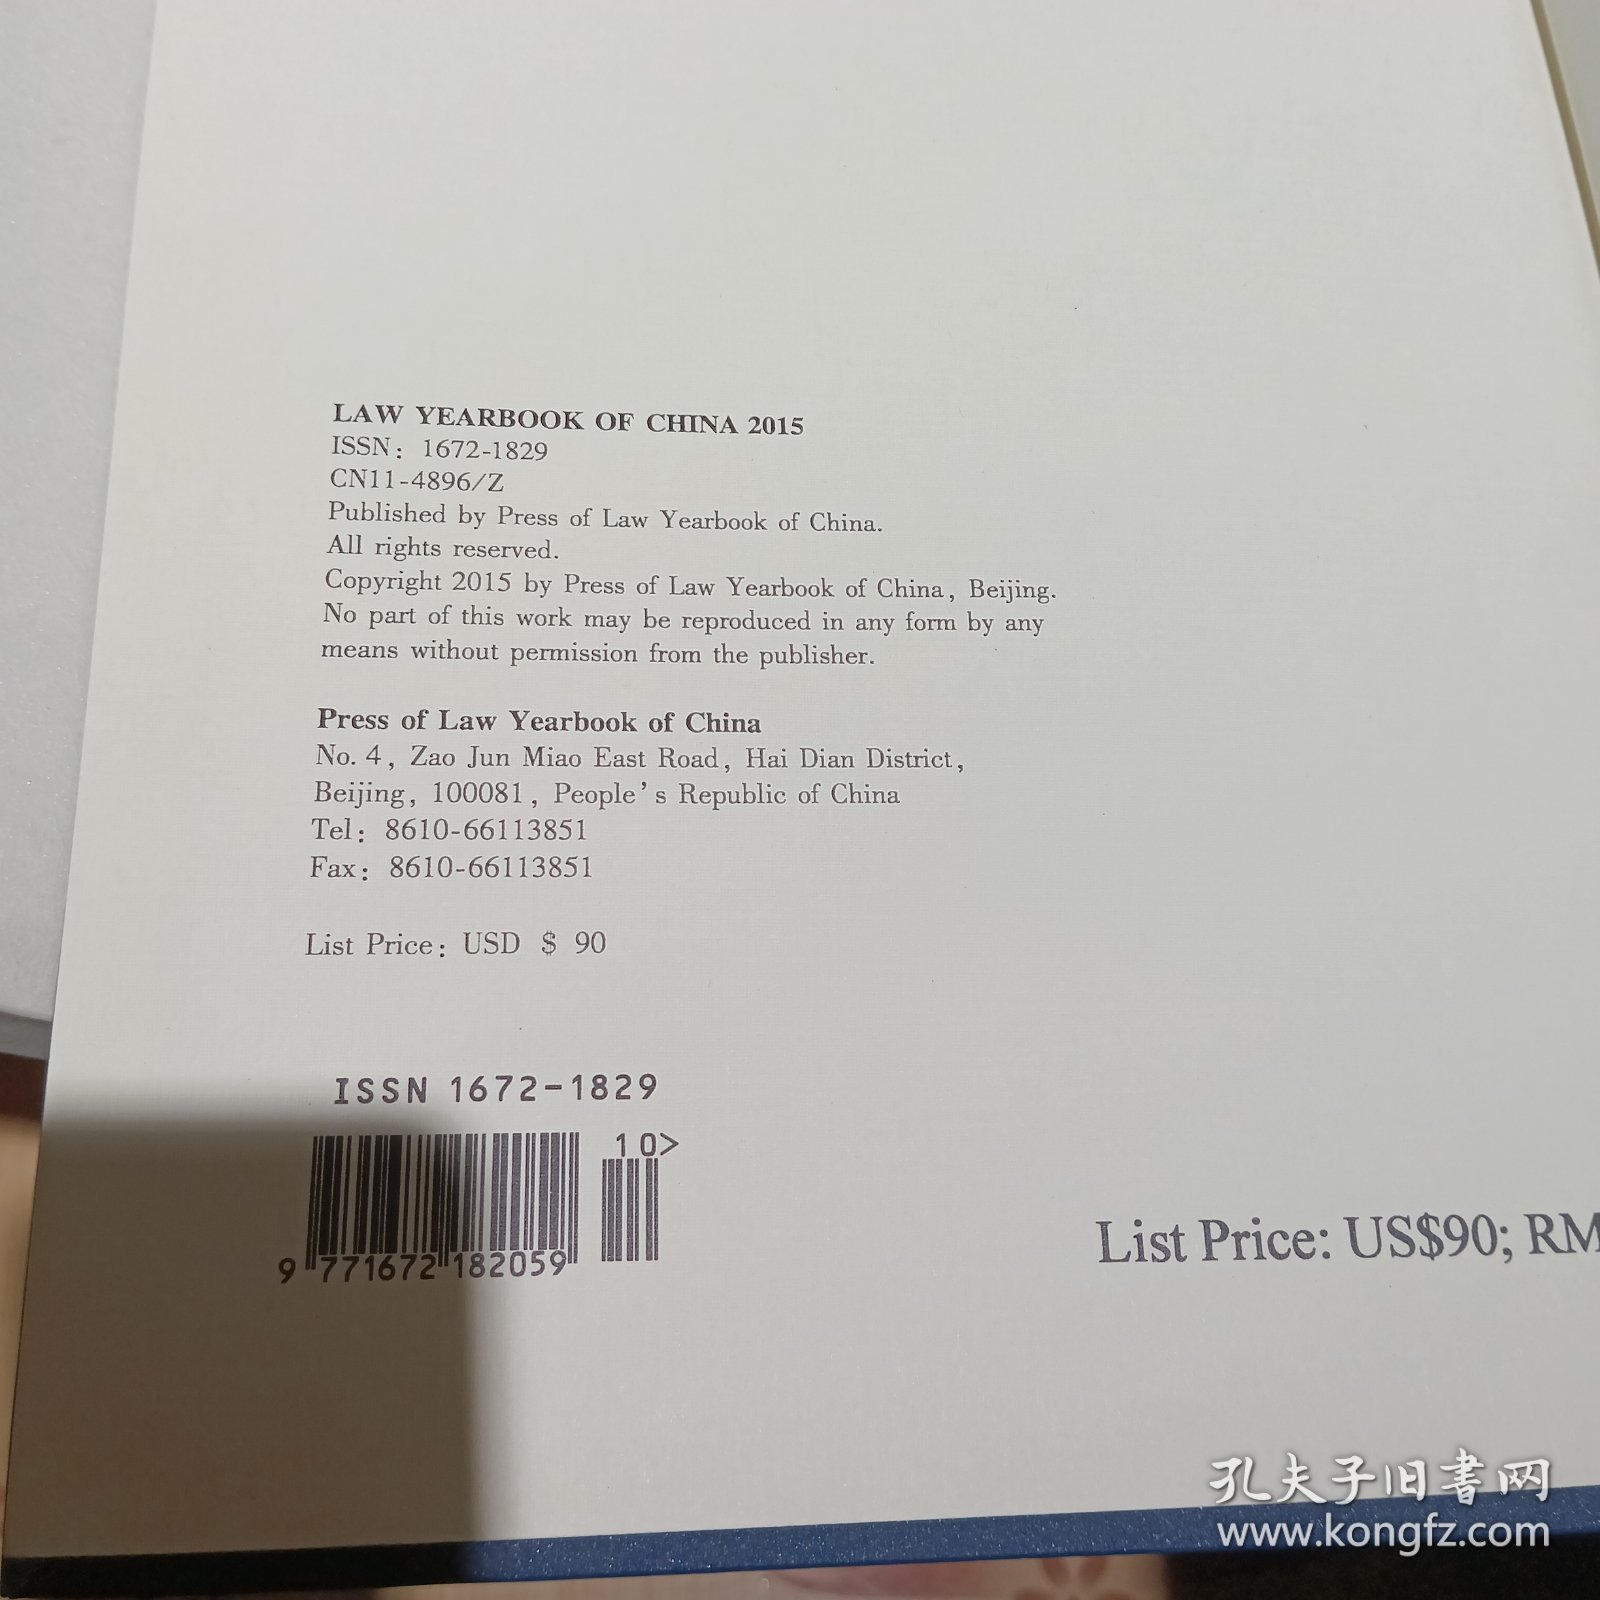 LAW YEARBOOK OF CHINA 20152015中国法律年鉴